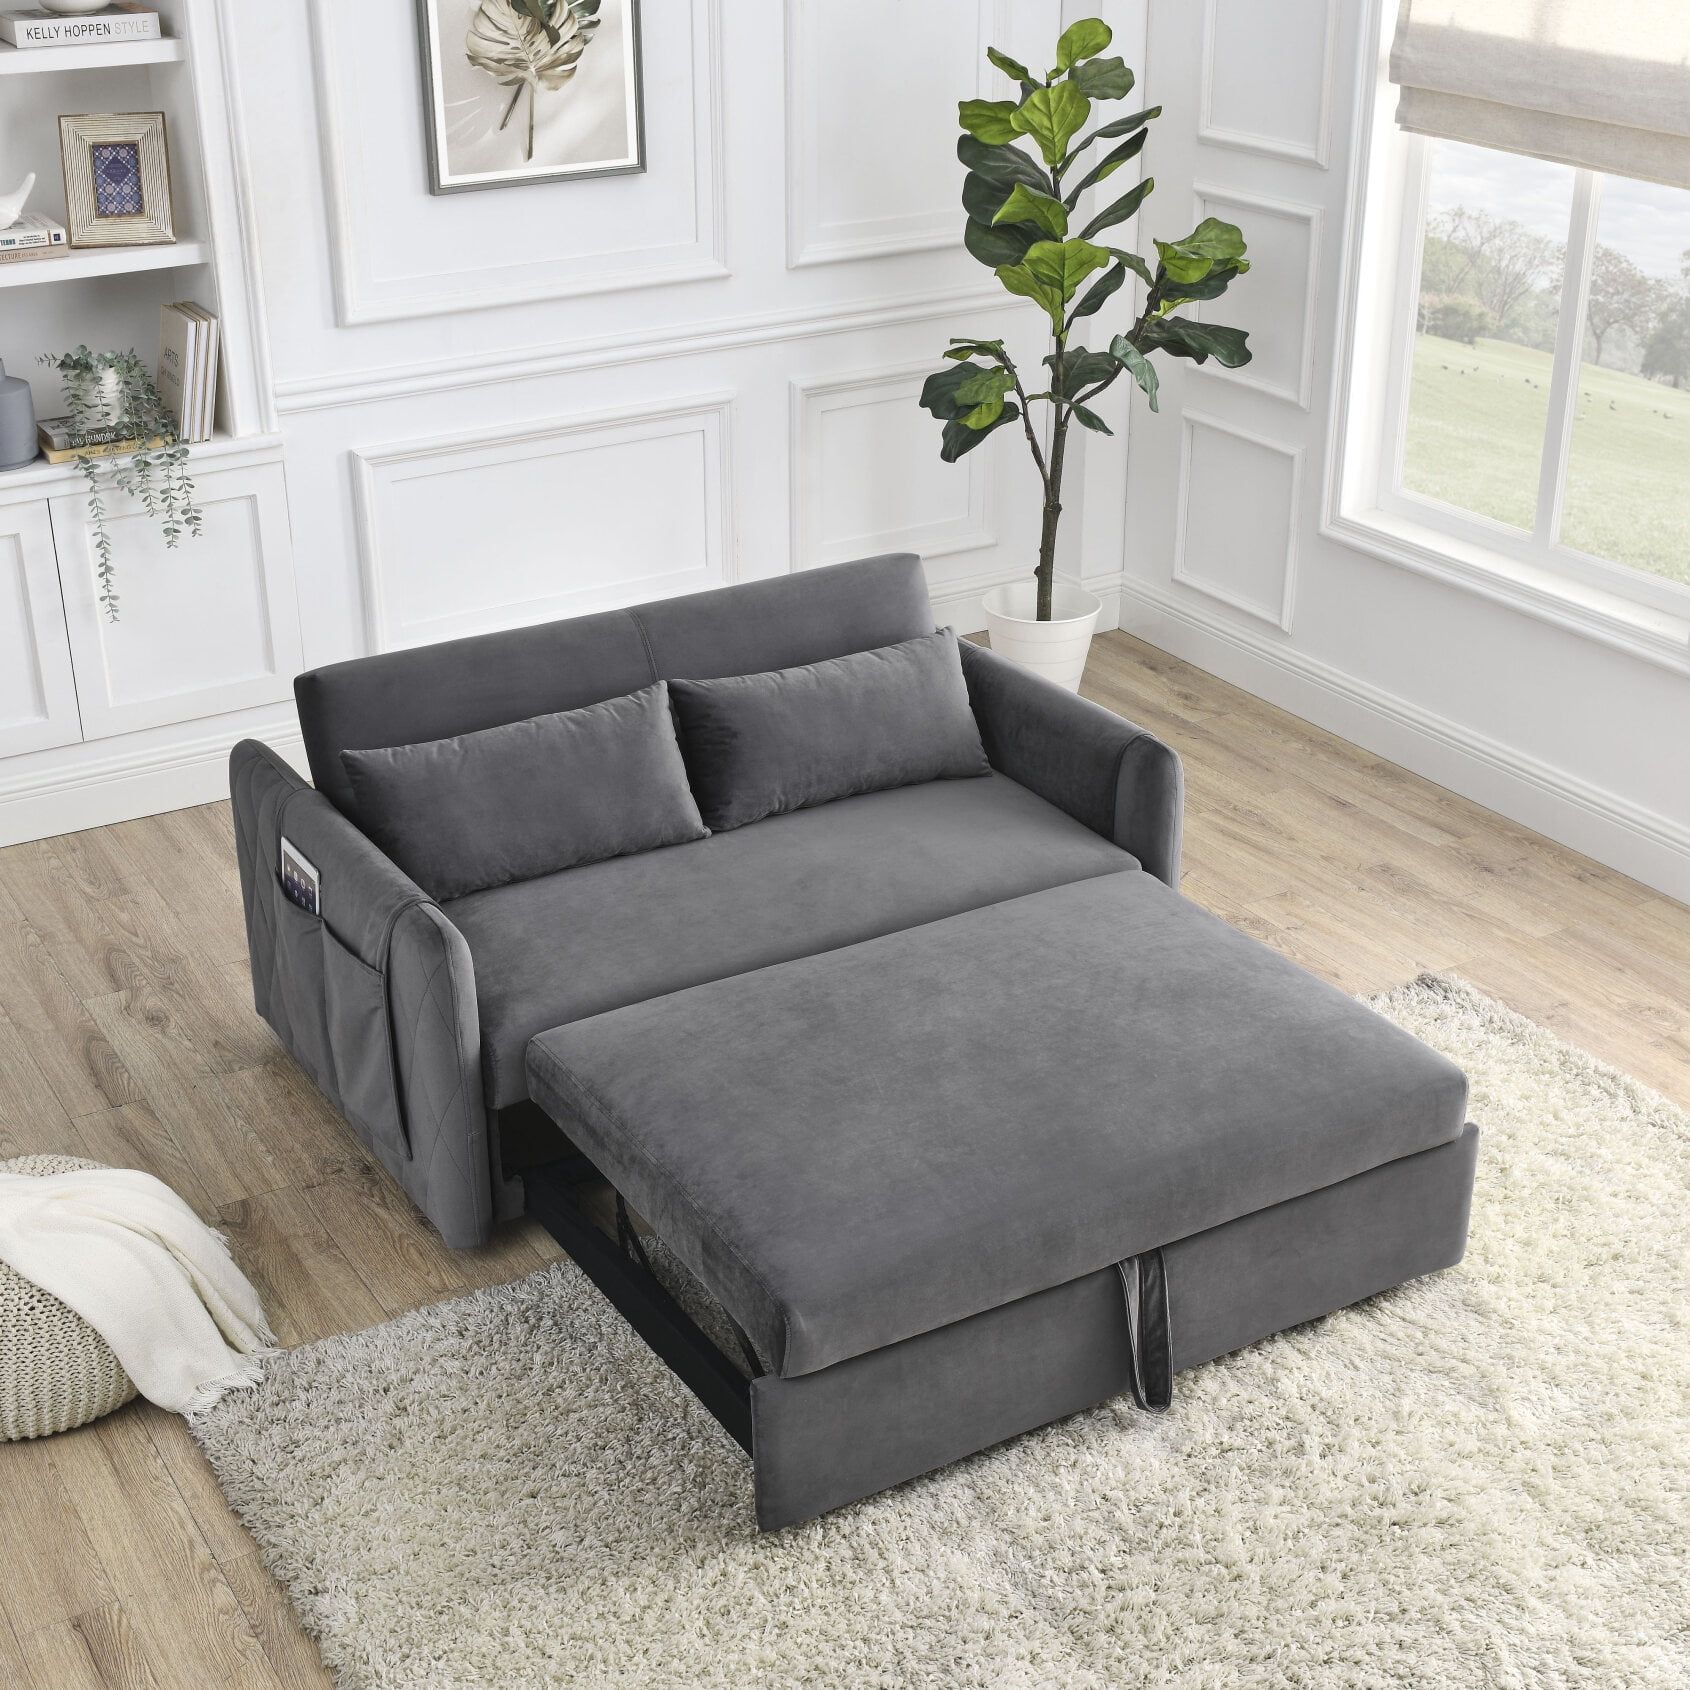 3 In 1 Convertible Sleeper Sofa Bed, Upholstered Pull Out Sofa With 2  Detachable Arm Pockets, Futon Sofa Bed With 2 Pillows And Adjustable  Backrest For Apartment Living Room – Walmart With Regard To 3 In 1 Gray Pull Out Sleeper Sofas (Photo 9 of 15)